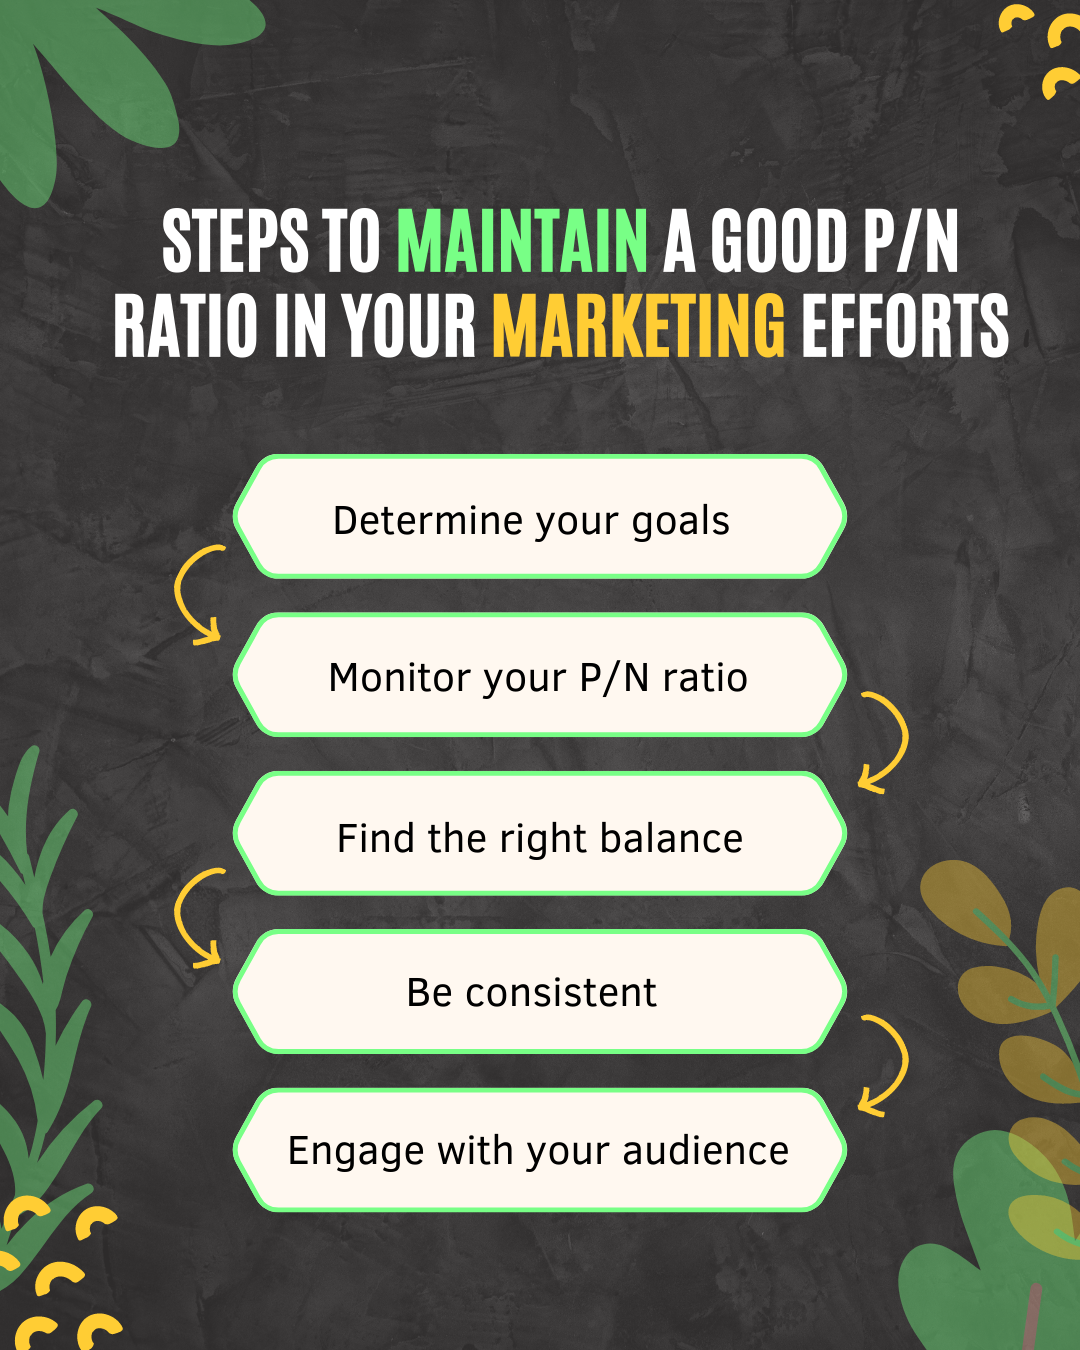 Steps to maintain a good P/N ratio in your marketing efforts